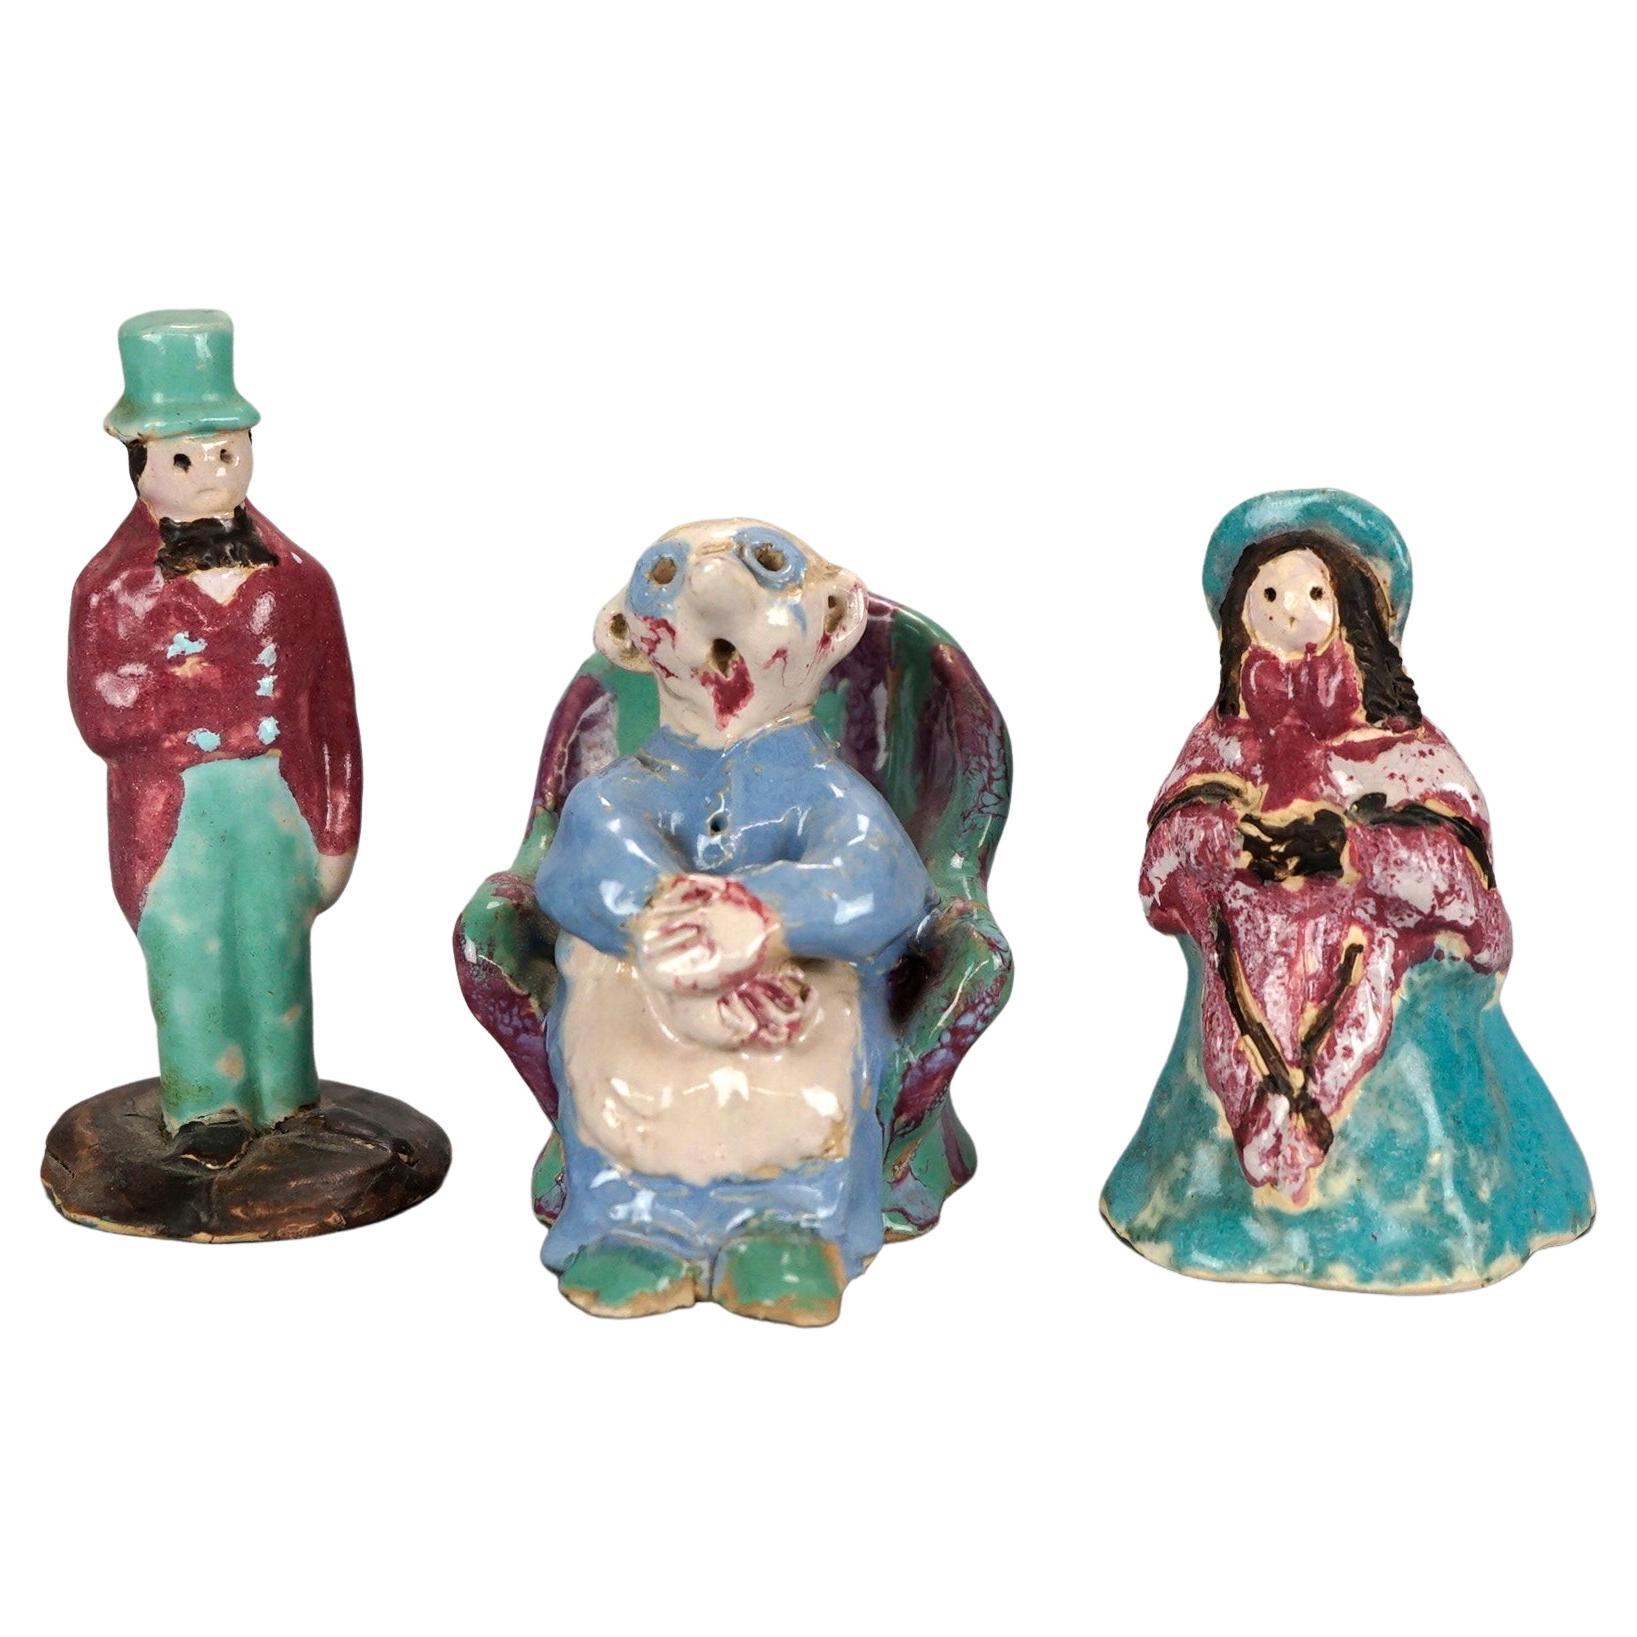 Three Antique Pottery Figurines by Overbeck, Circa 1920